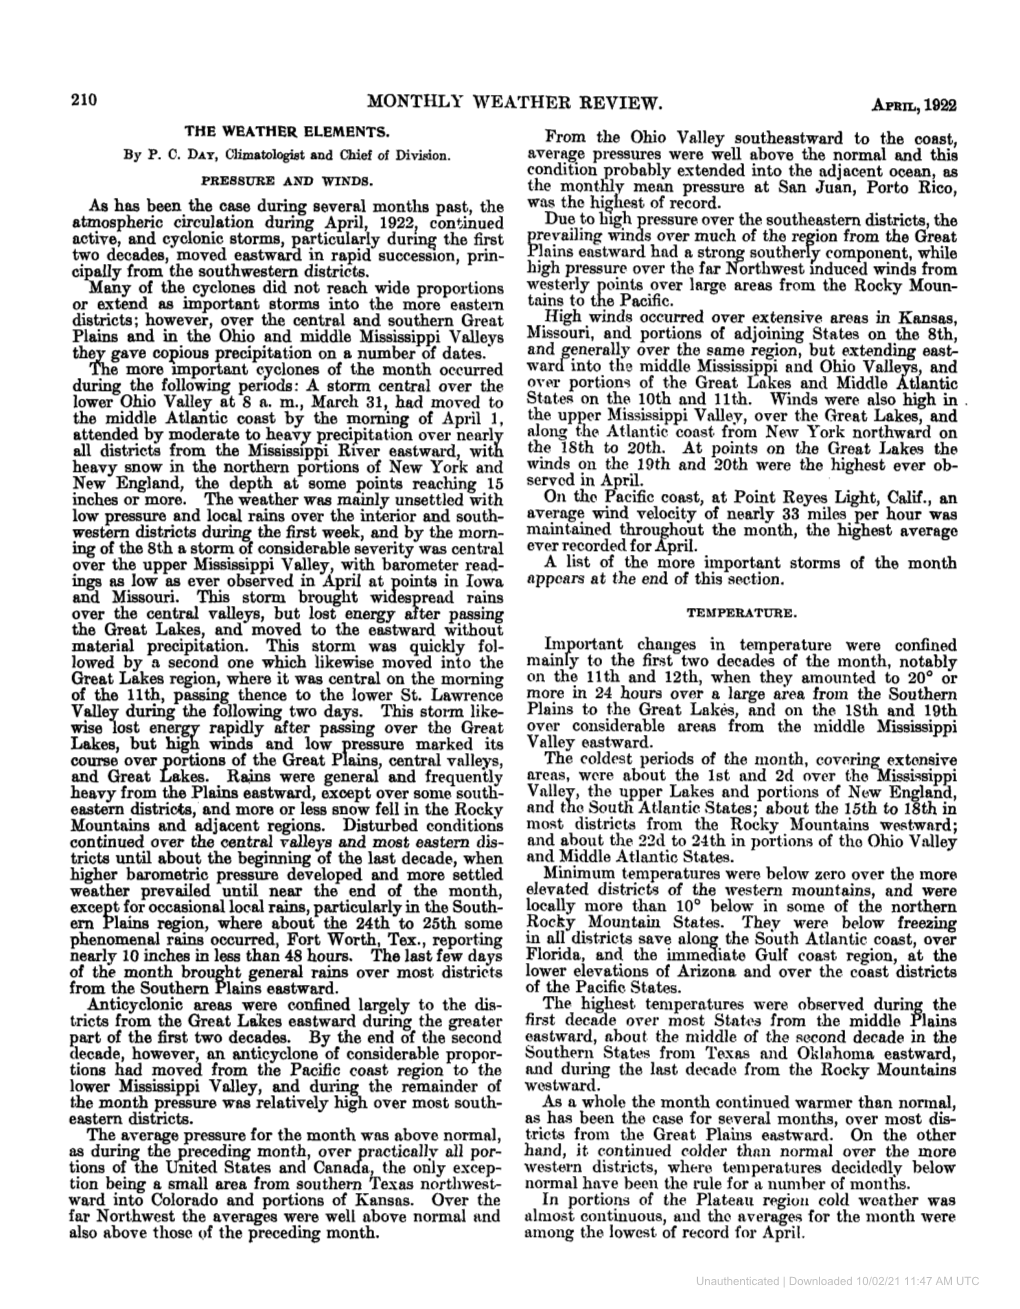 Monthly Weather Review. April, 1922